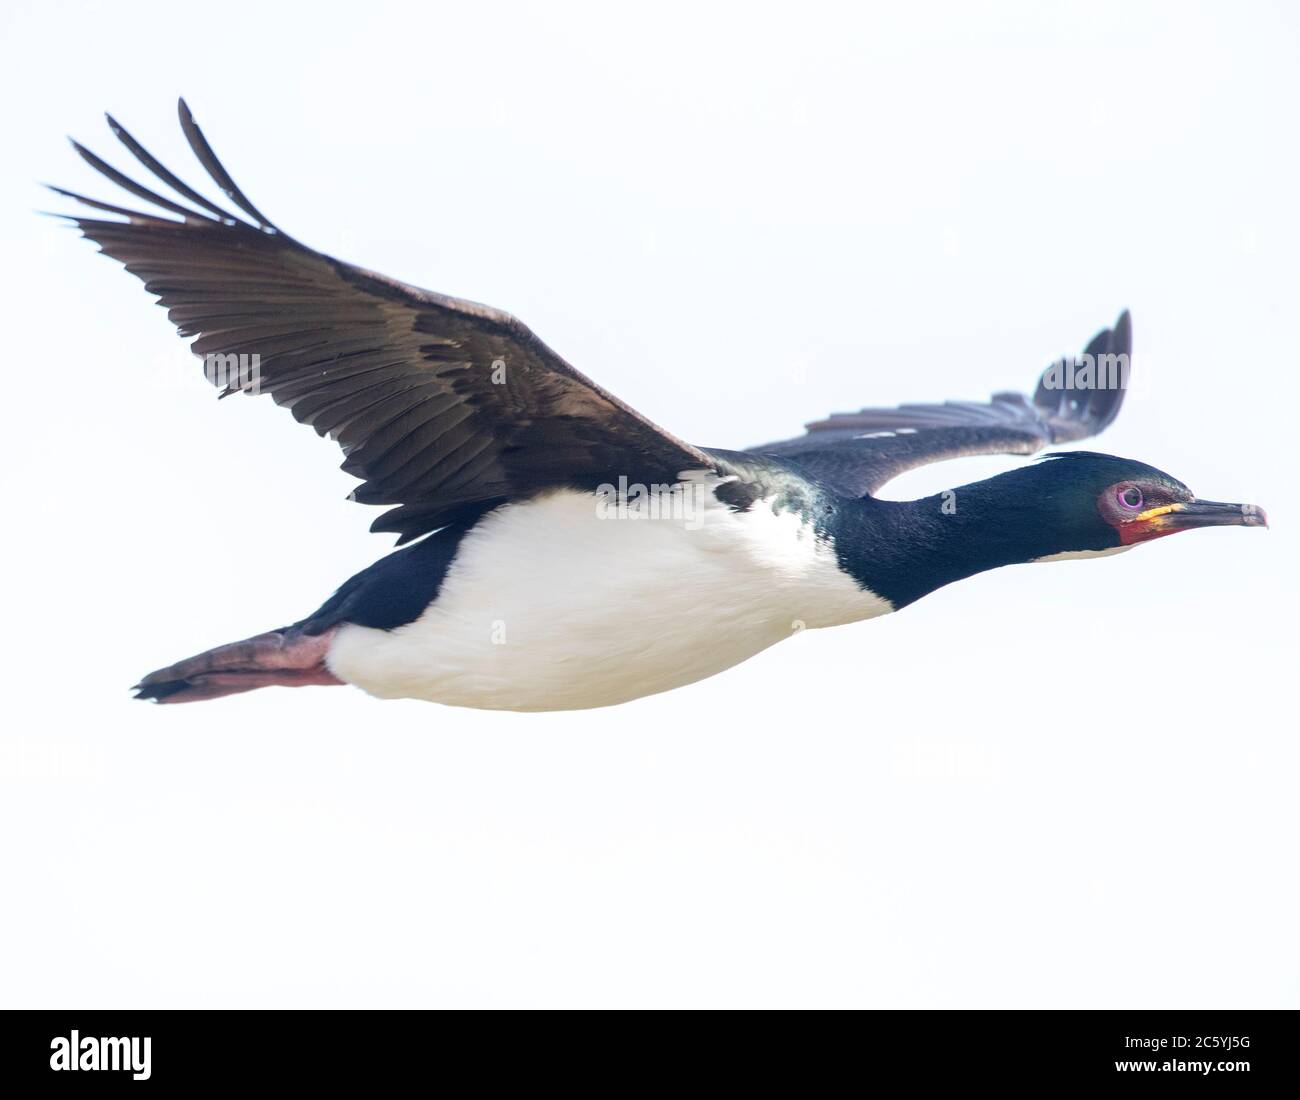 Adult Auckland Islands Shag (Leucocarbo colensoi) flying along the coast on Enderby Island, Auckland Islands in subantarctic New Zealand. Stock Photo